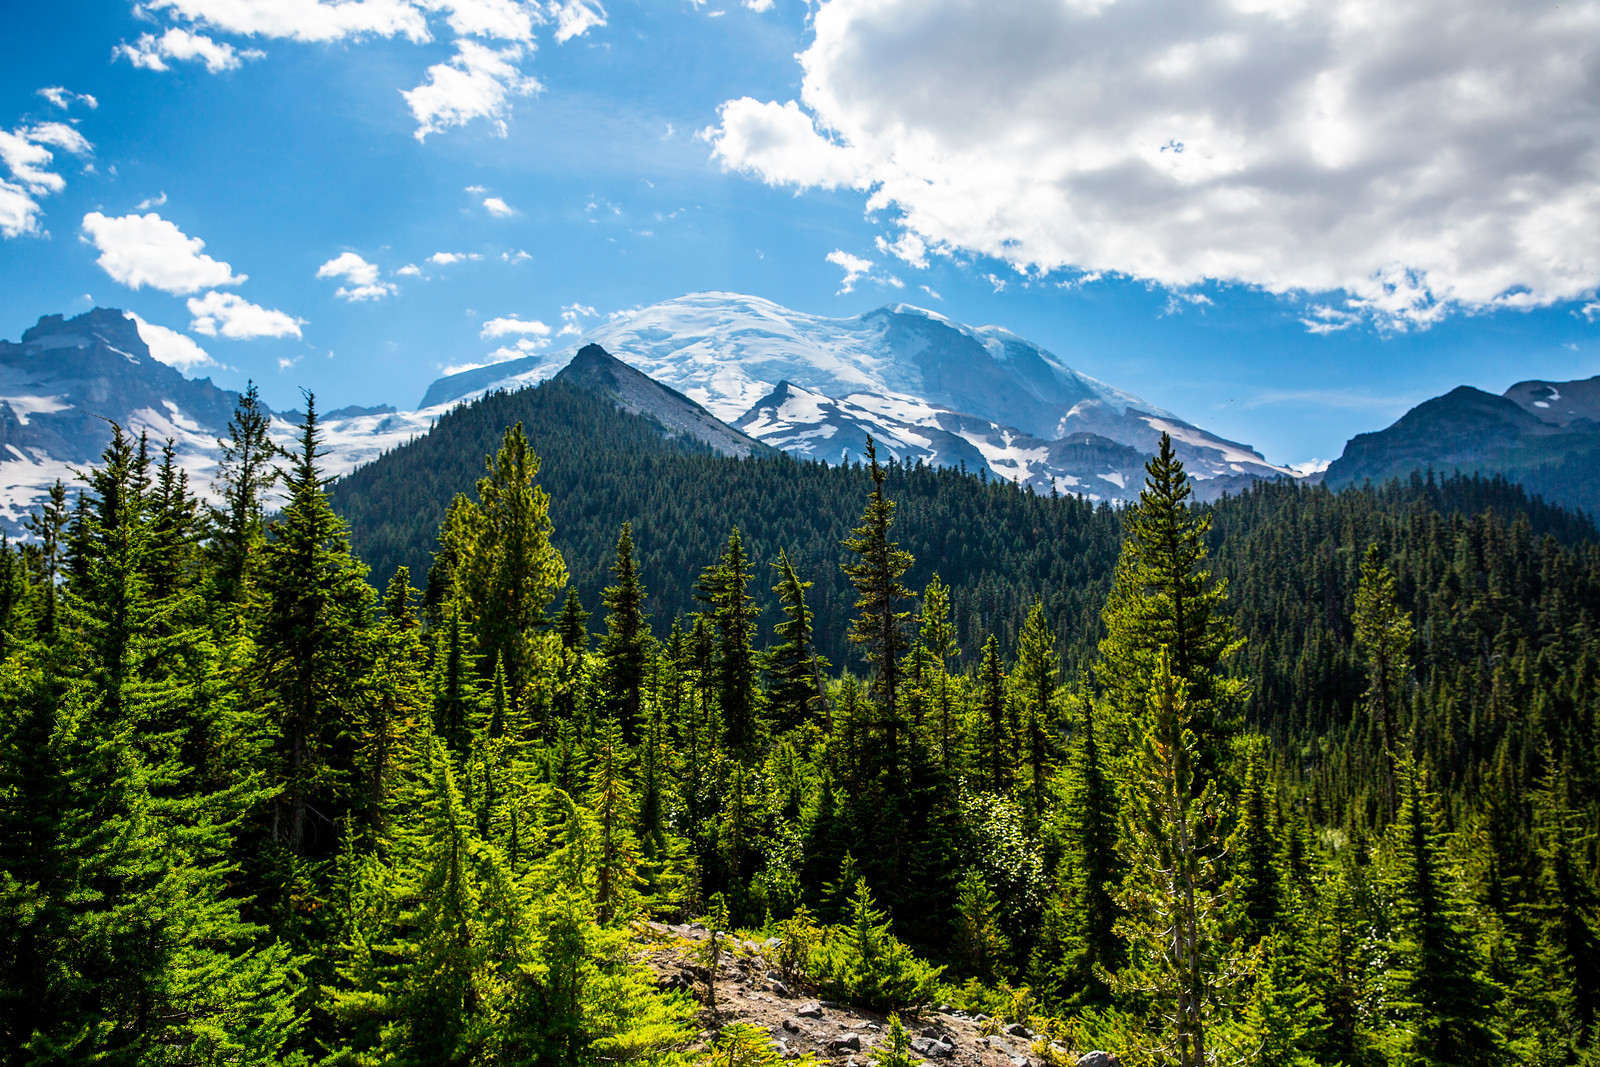 Mount Rainier National Park with trees in the foreground, mountain top with snow in the background and blue skies with clouds